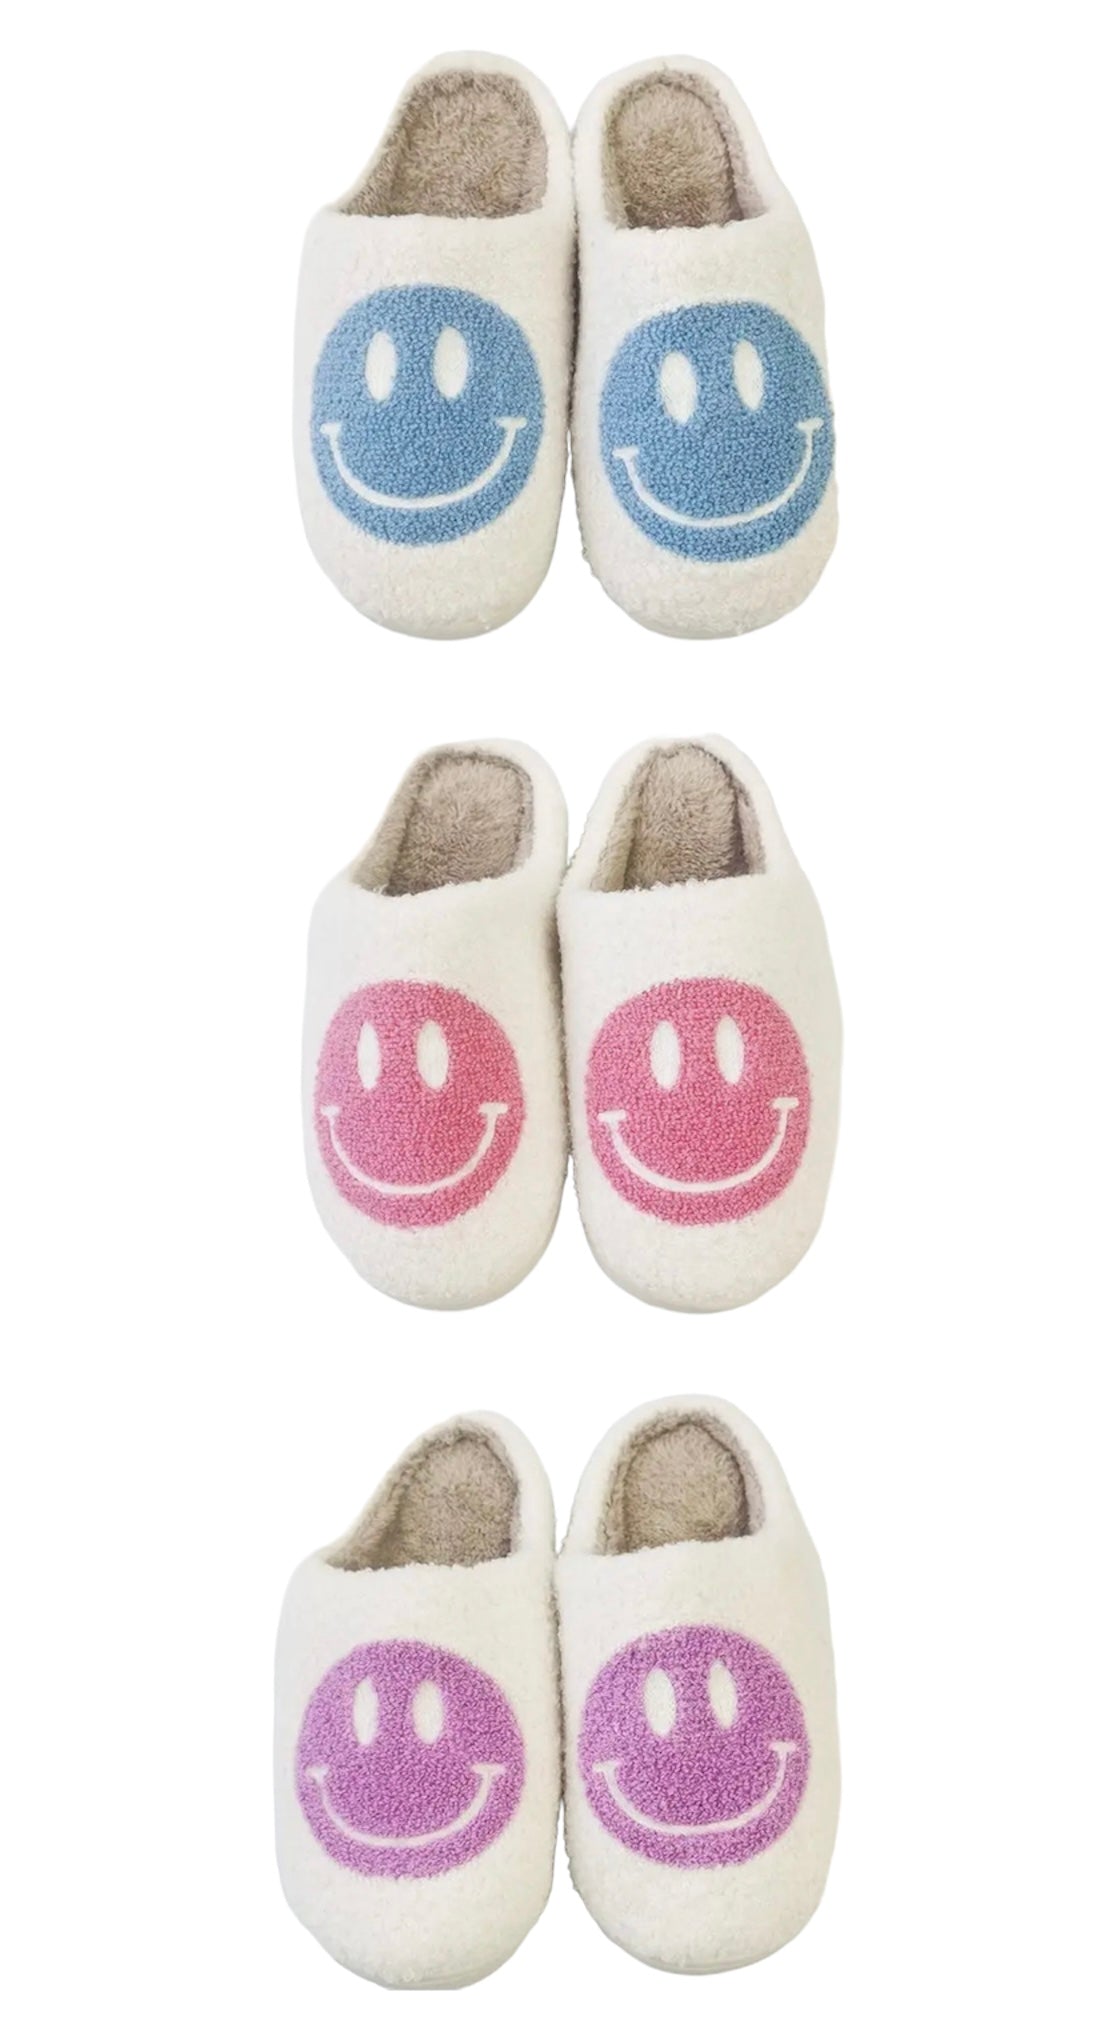 10 Festive Slippers for a Cozy Santa Smiley Face Holiday